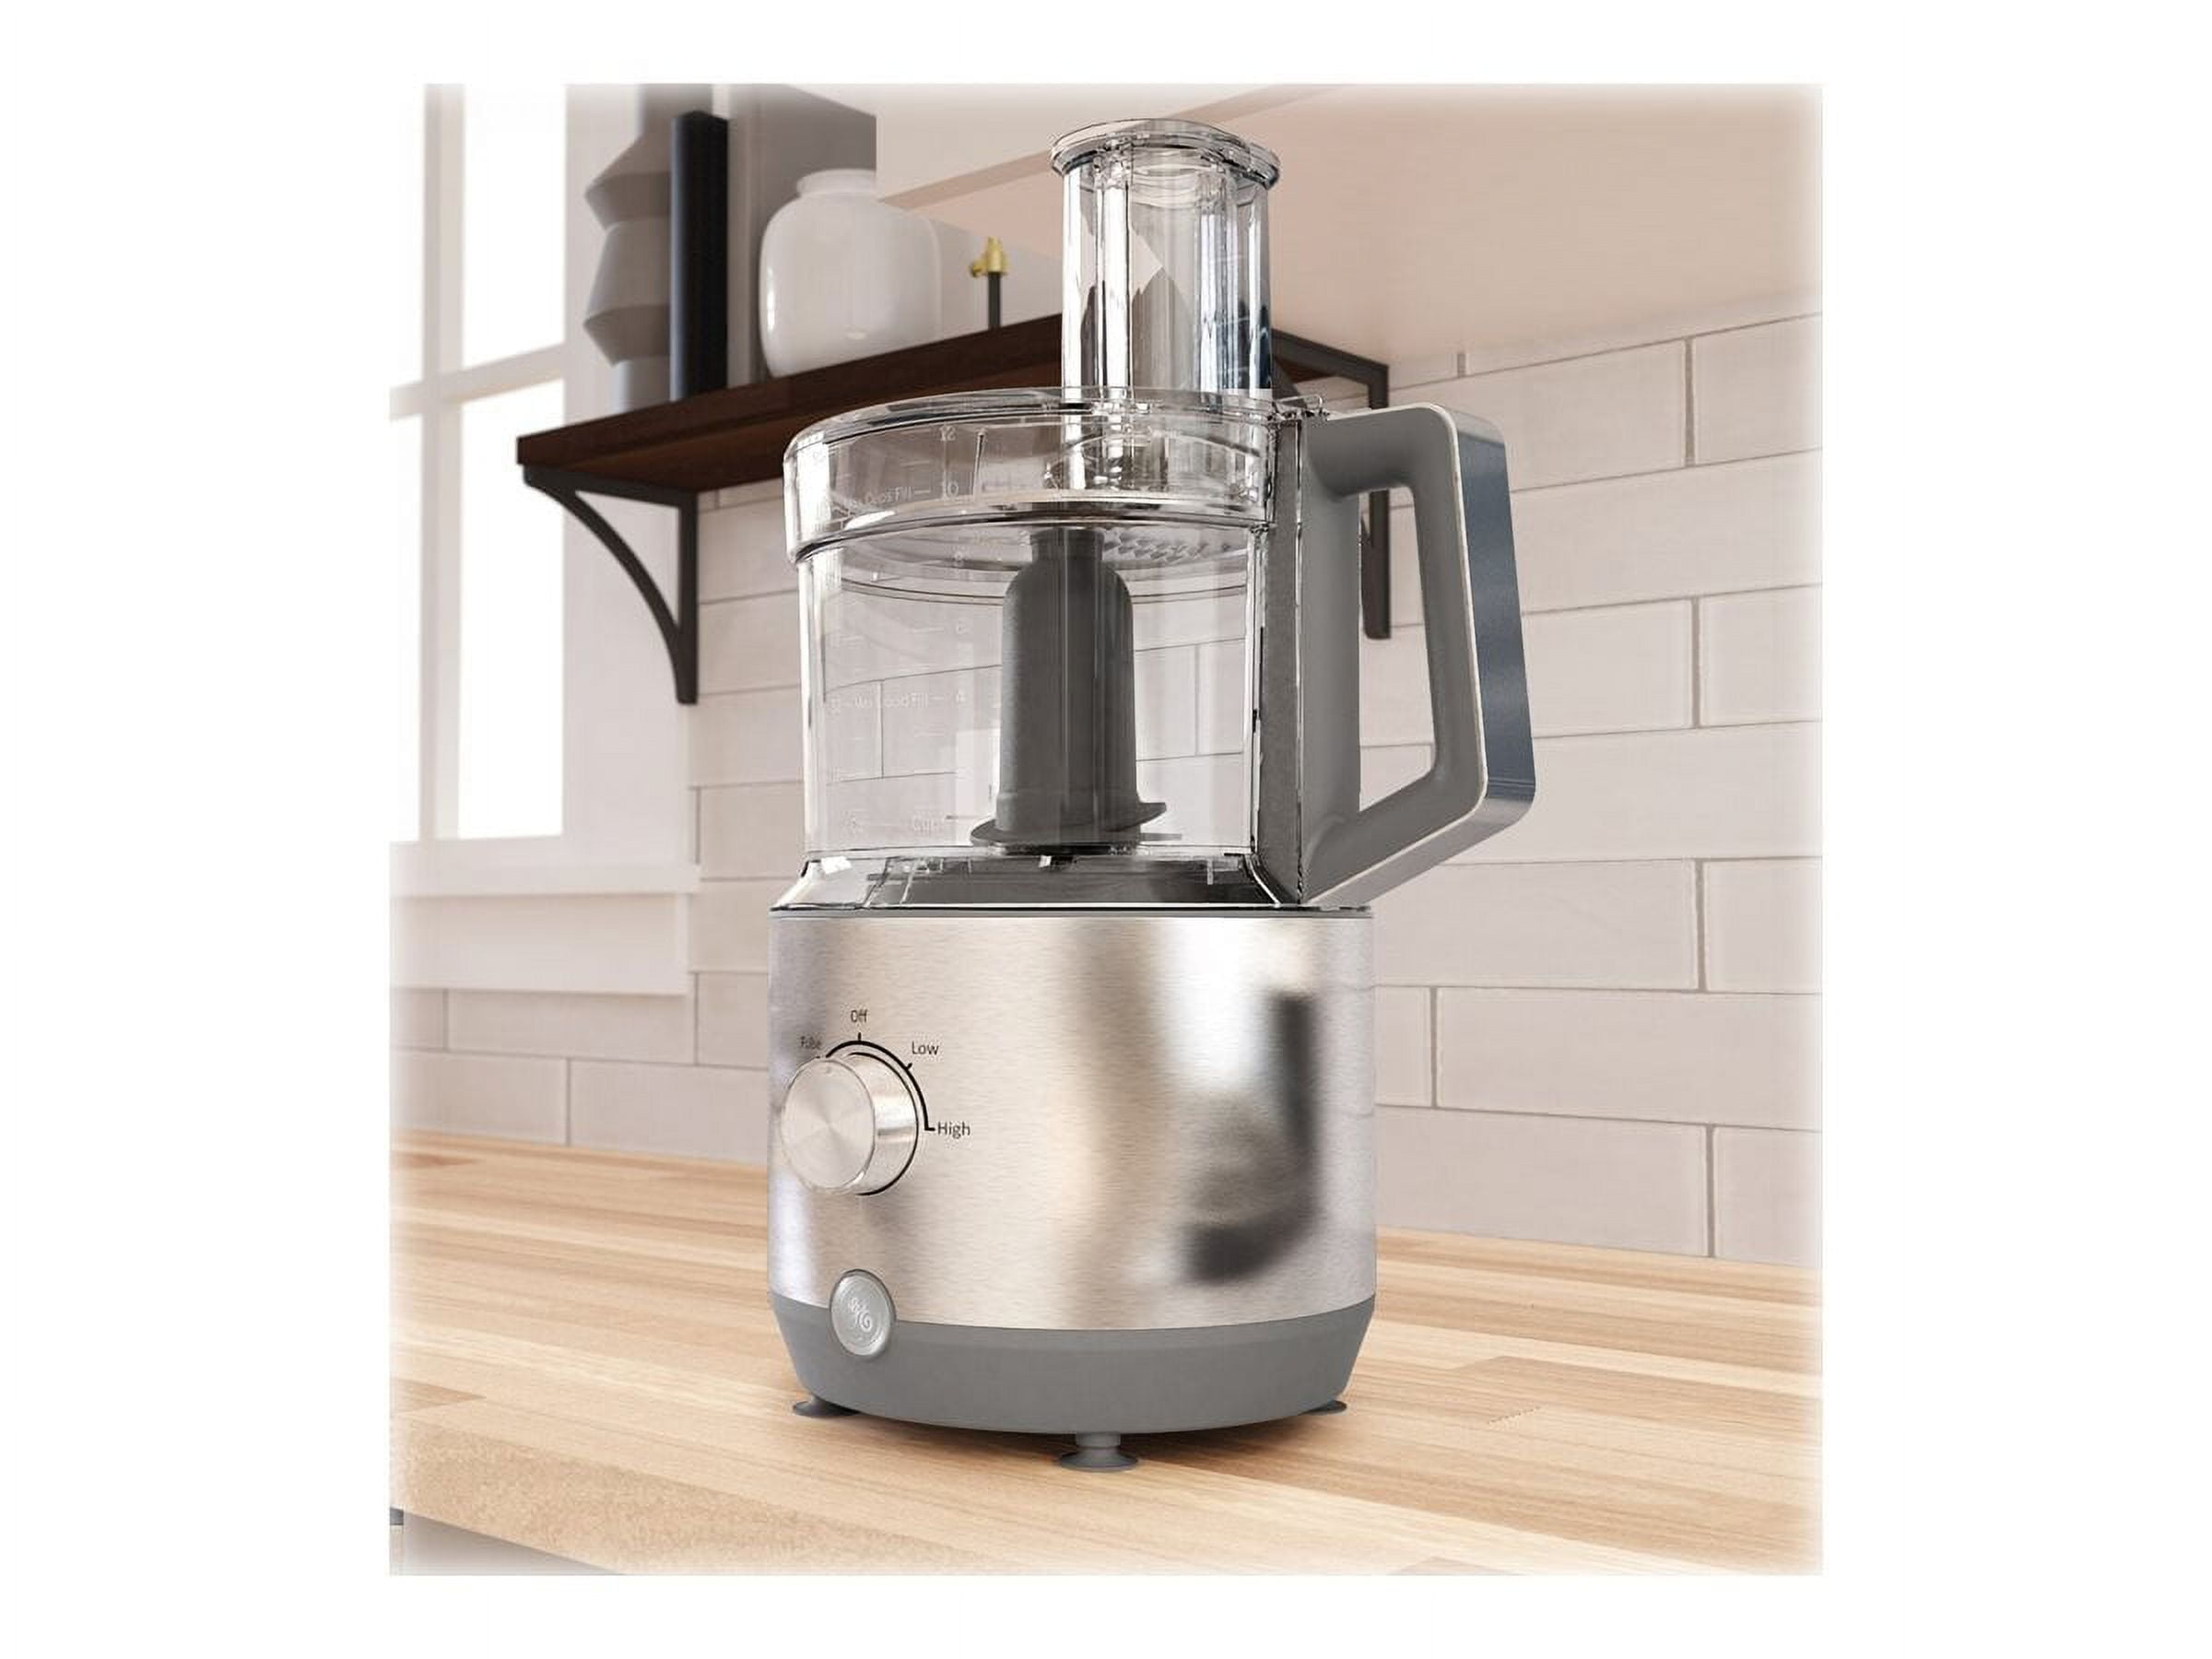 GE G8P0AASSPSS - Food processor - 12 cup - 550 W - stainless steel